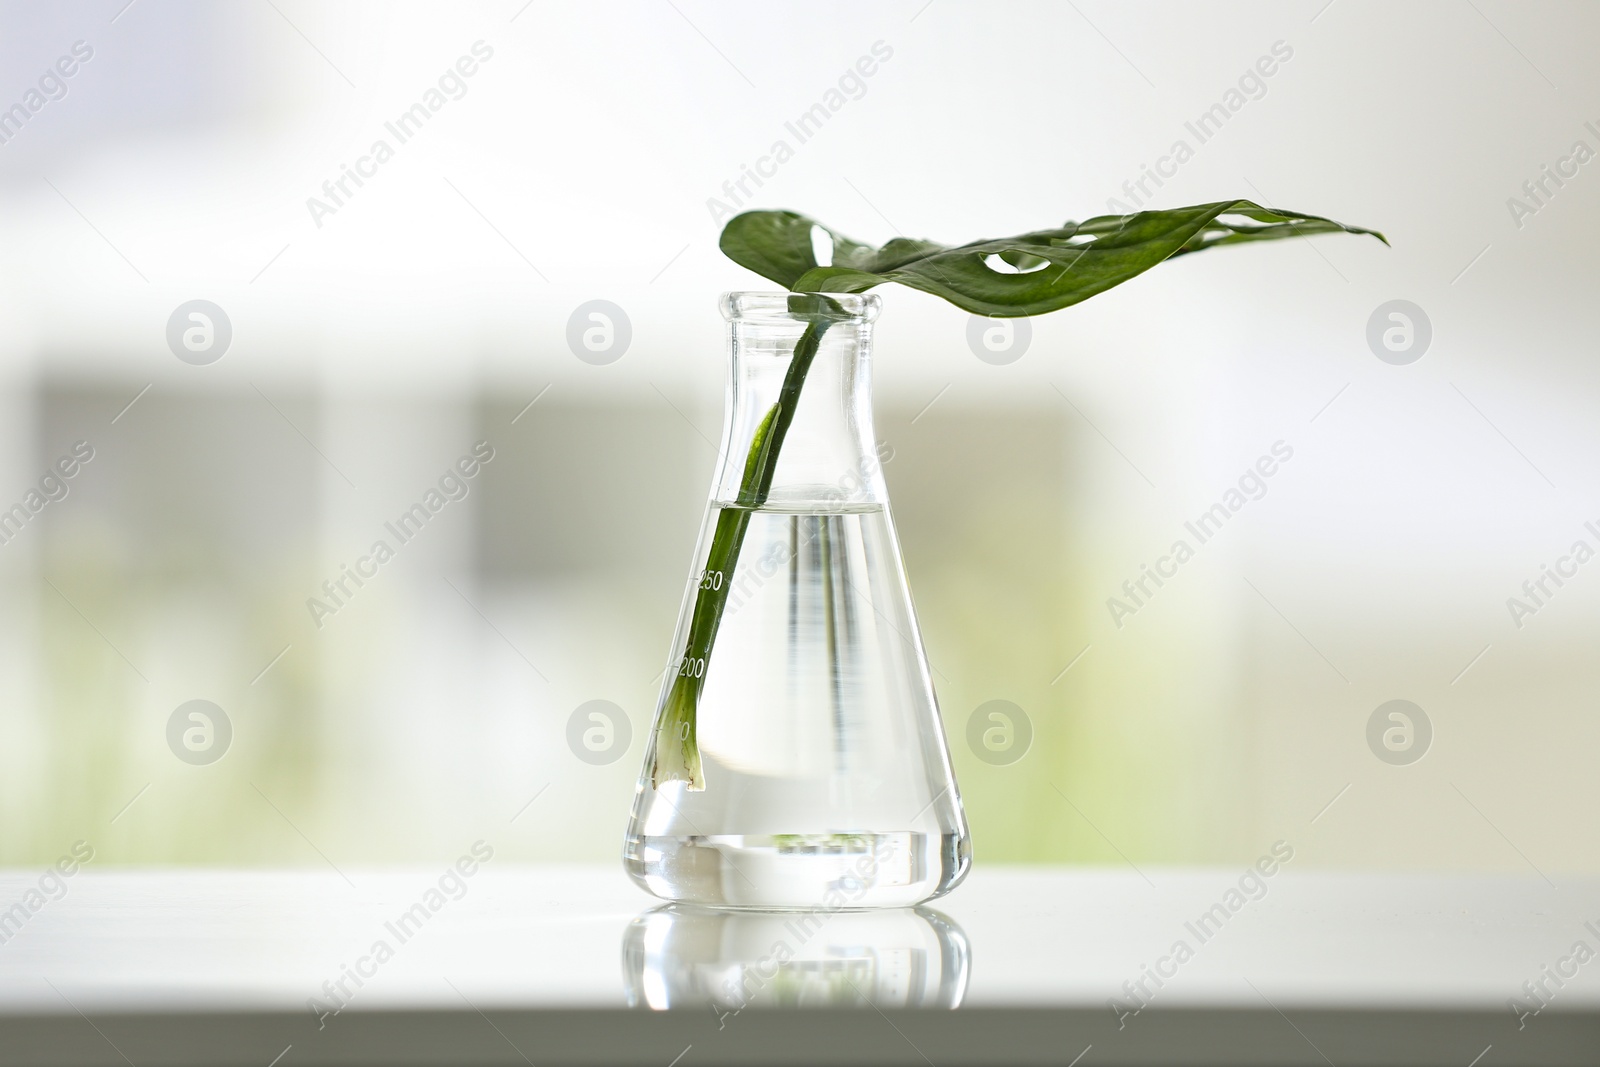 Photo of Conical flask with plant on table against blurred background. Chemistry laboratory research